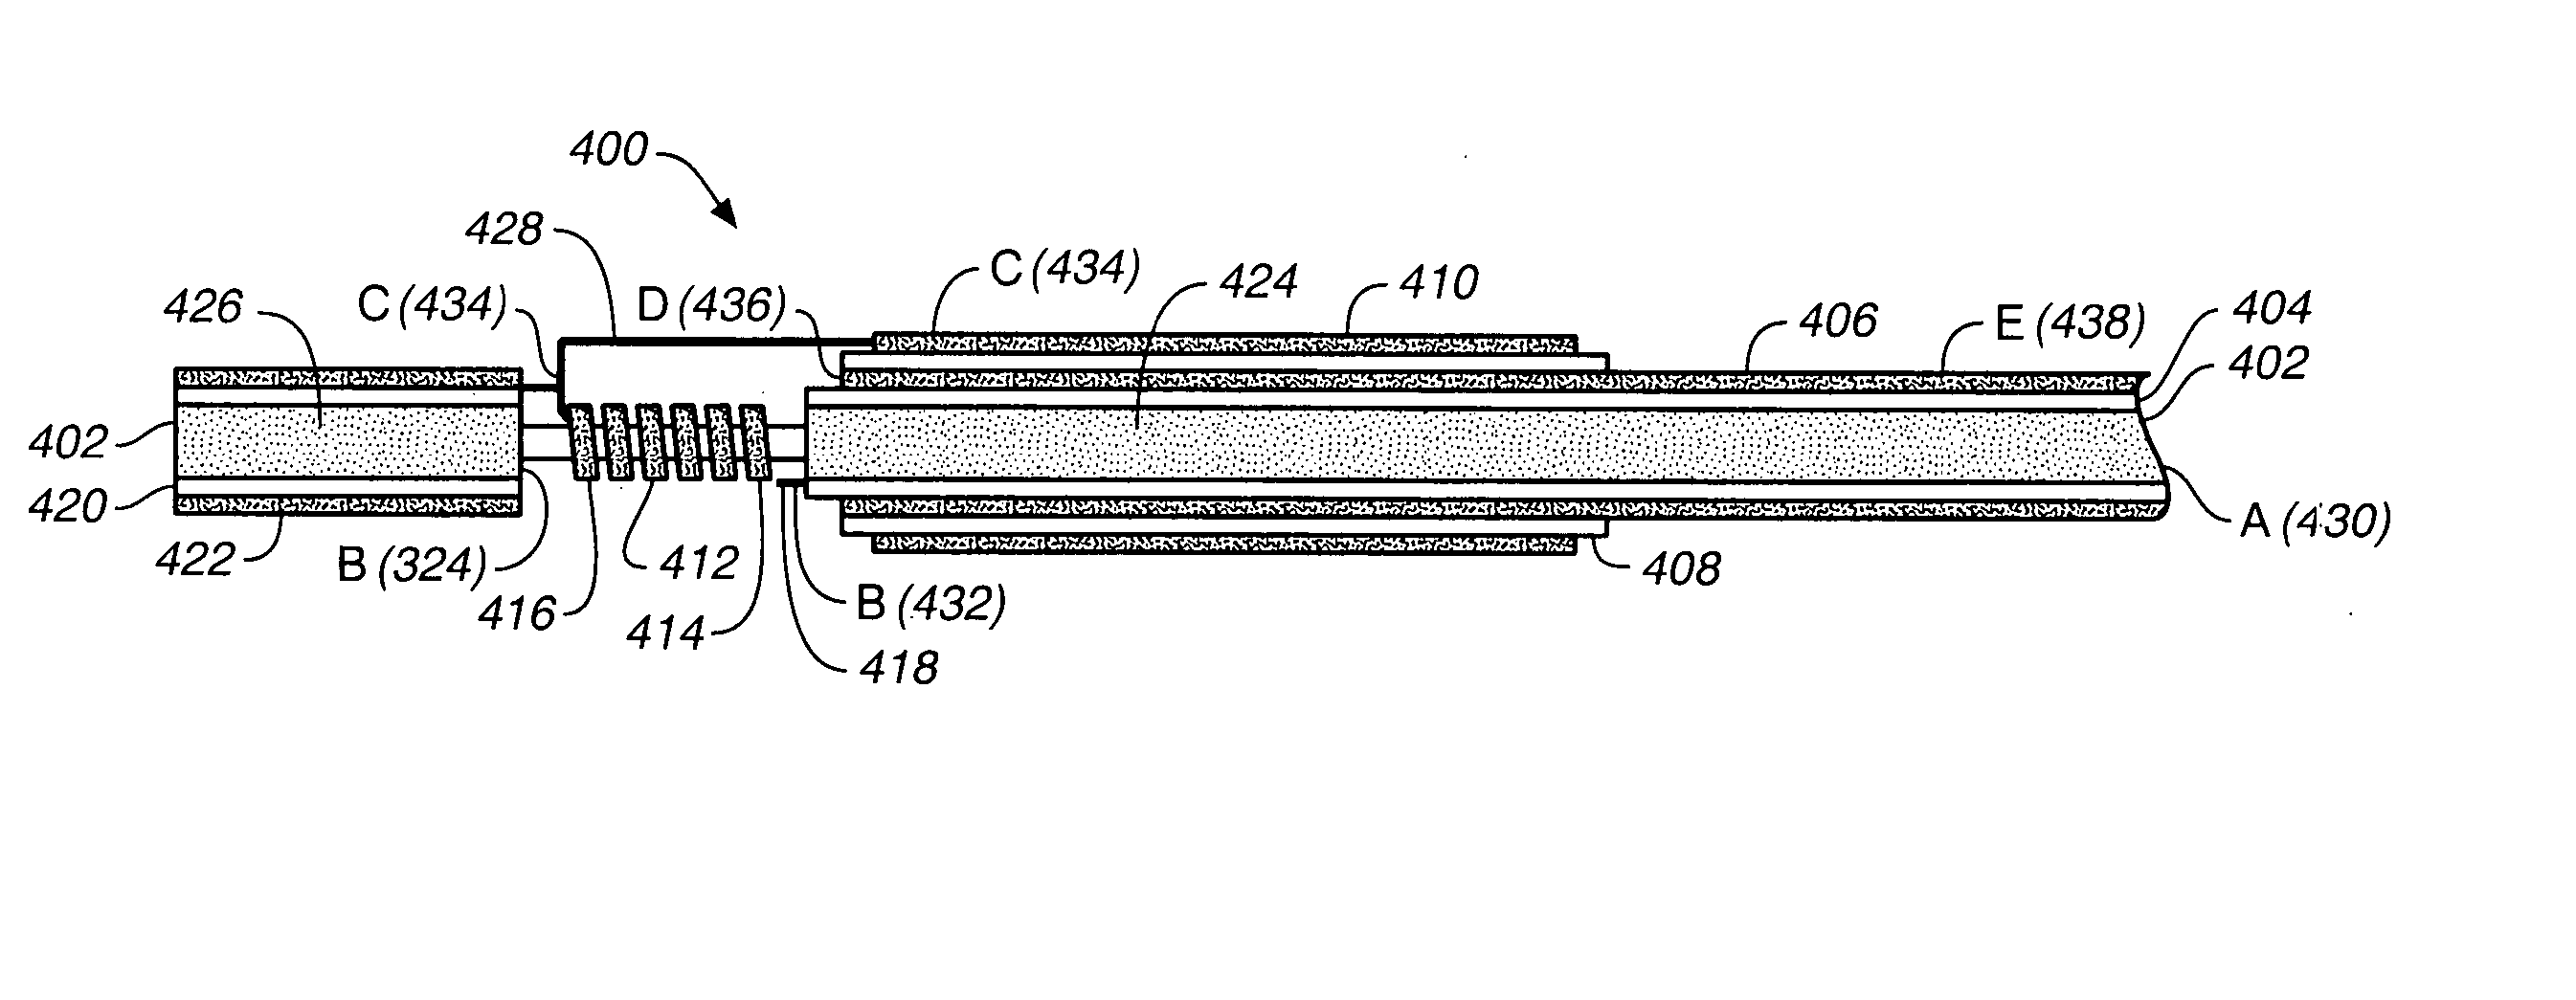 Apparatus and construction for intravascular device